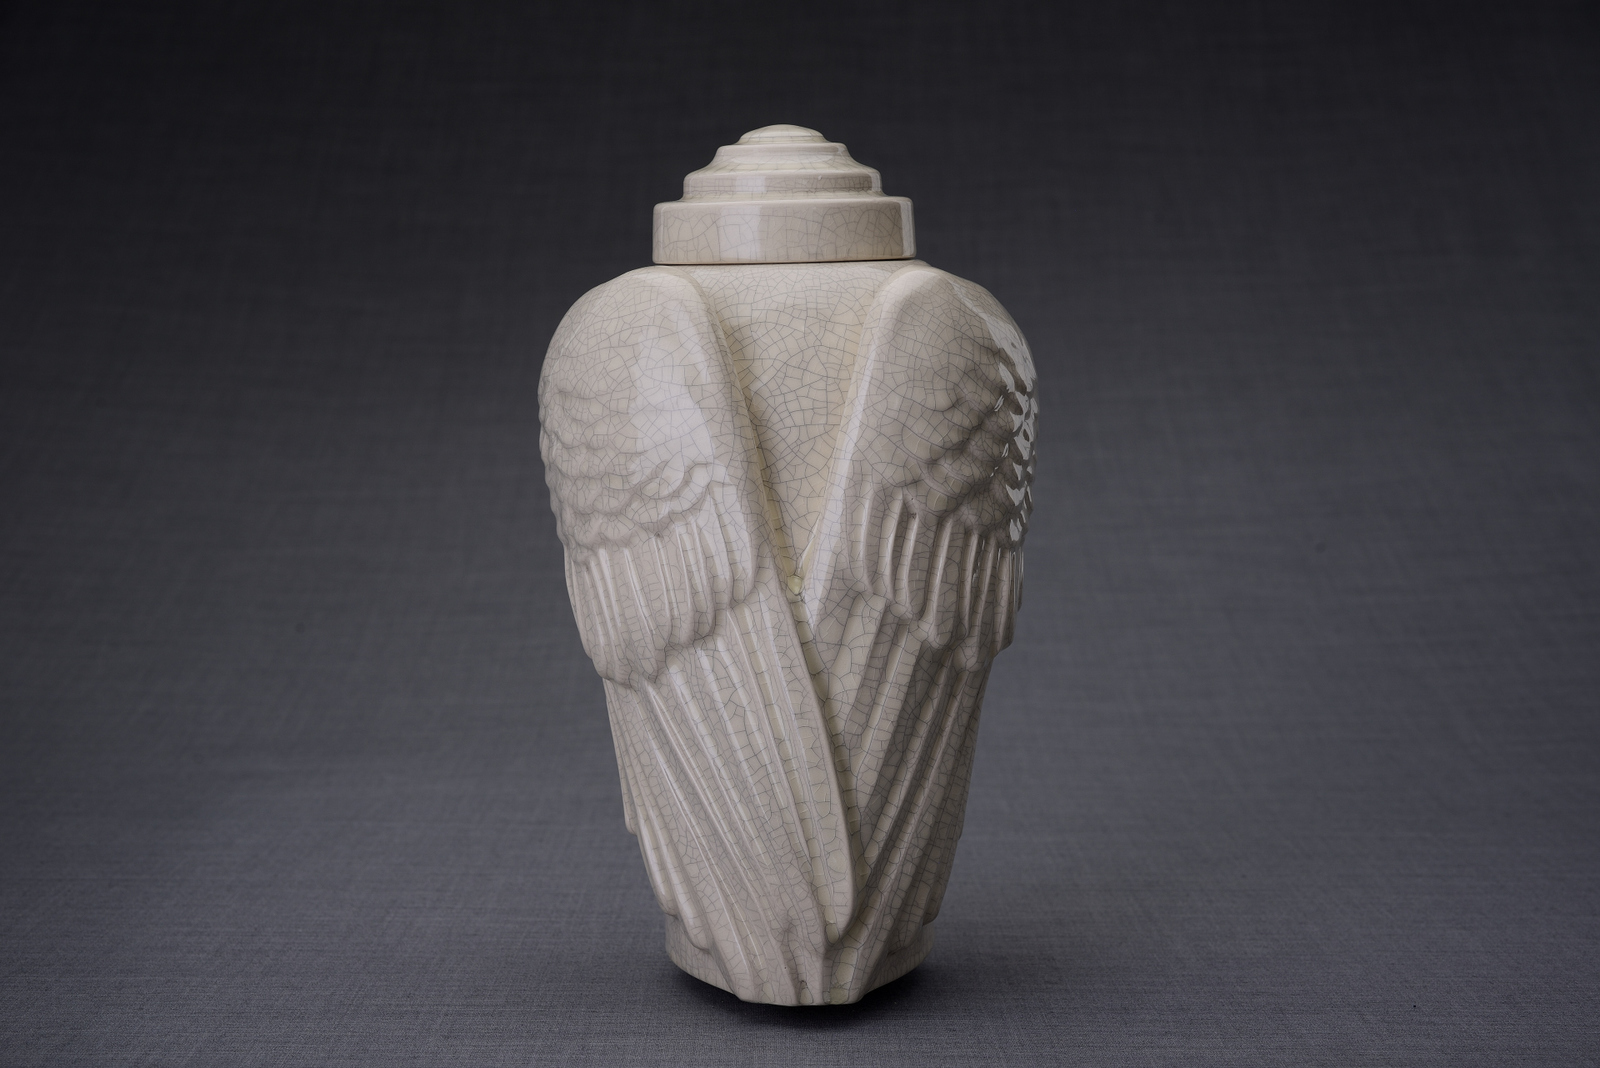 Primary image for Handmade Cremation Urn for Ashes "Wings" - Large | Craquelure | Ceramic